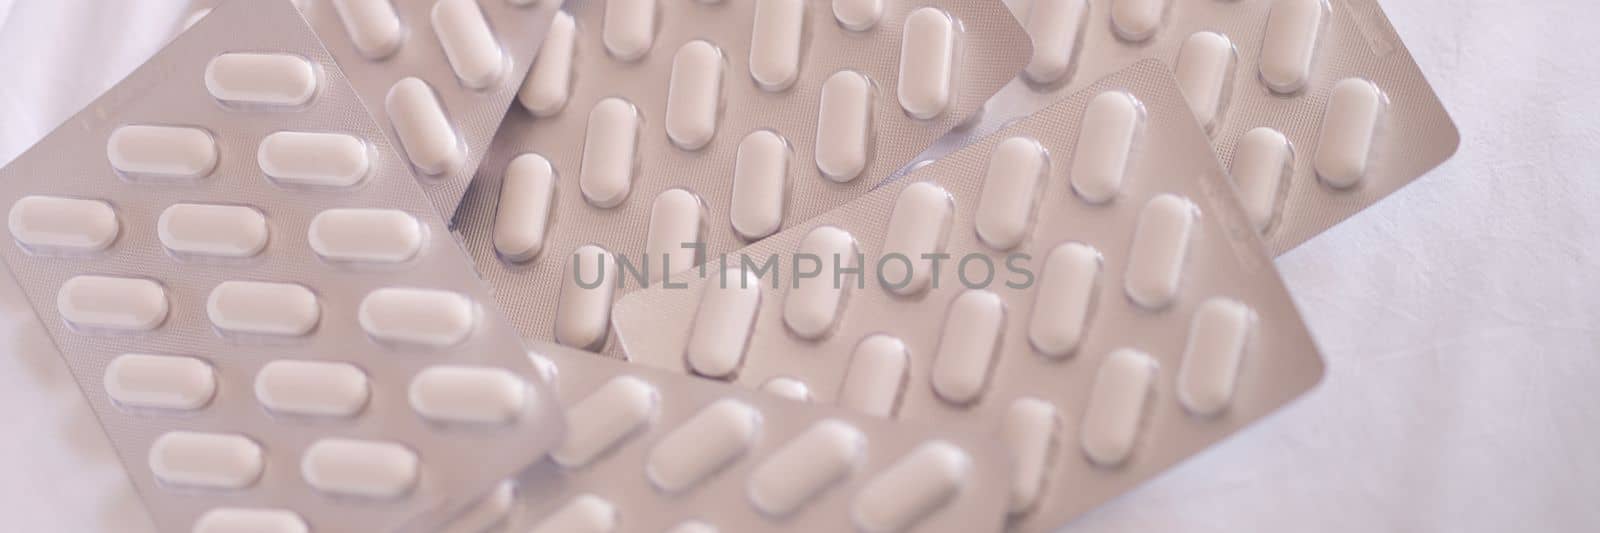 Heaps of blisters with medical pills on table. Taking medications and choosing tablets concept